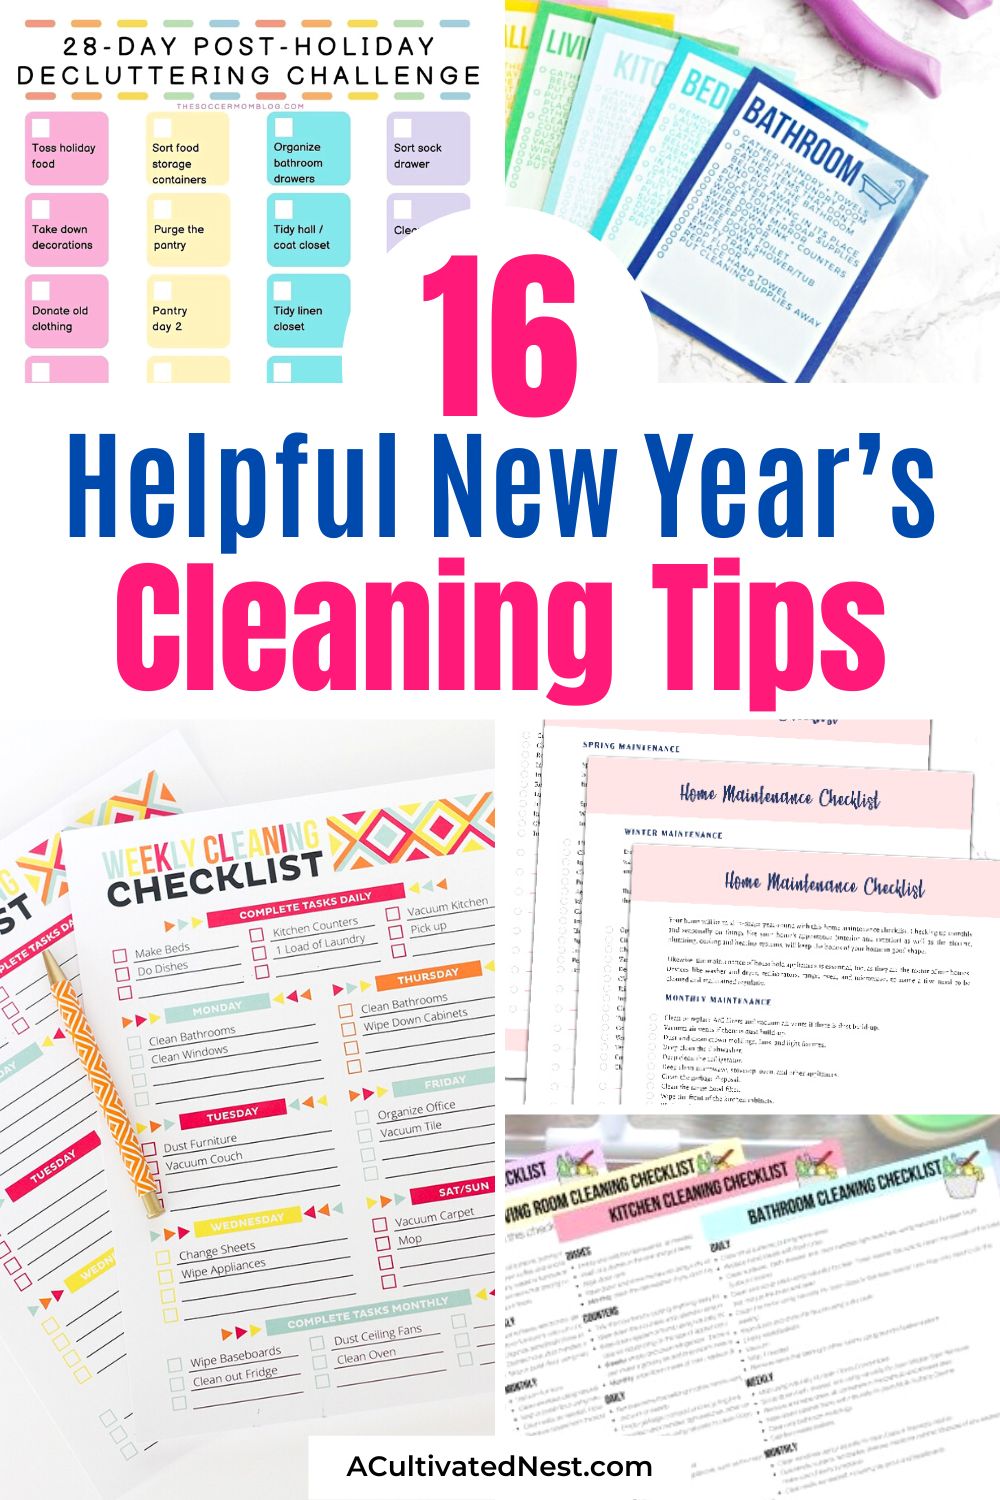 16 Helpful New Year Cleaning Tips- Transform your living space into a haven of cleanliness and order with these New Year cleaning tips. Bid farewell to clutter and welcome a tidier, more peaceful home. Start the year on a clean note and let these tips guide you to a refreshed living space. | #cleaning #organizing #Organization #decluttering #ACultivatedNest